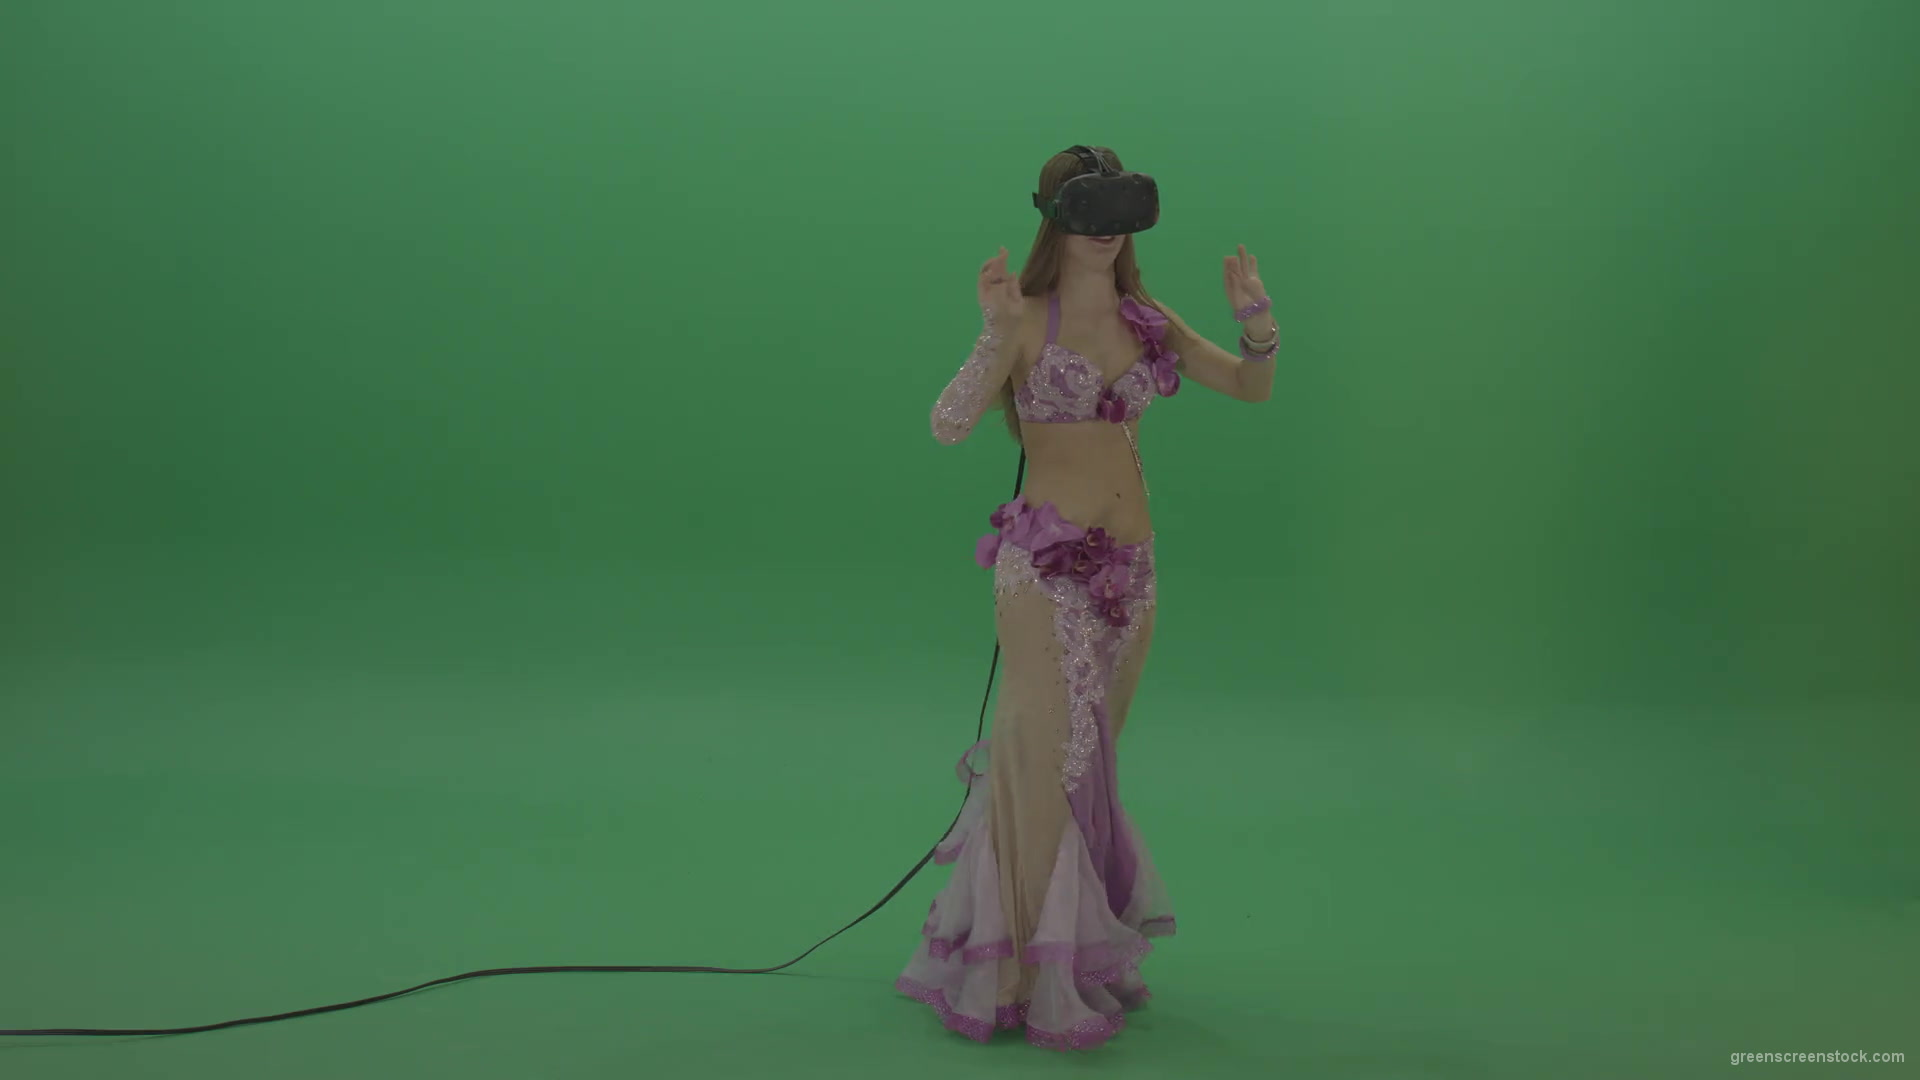 Beautiful-belly-dancer-in-purple-wear-and-VR-headset-dances-over-green-screen-background-1920_004 Green Screen Stock